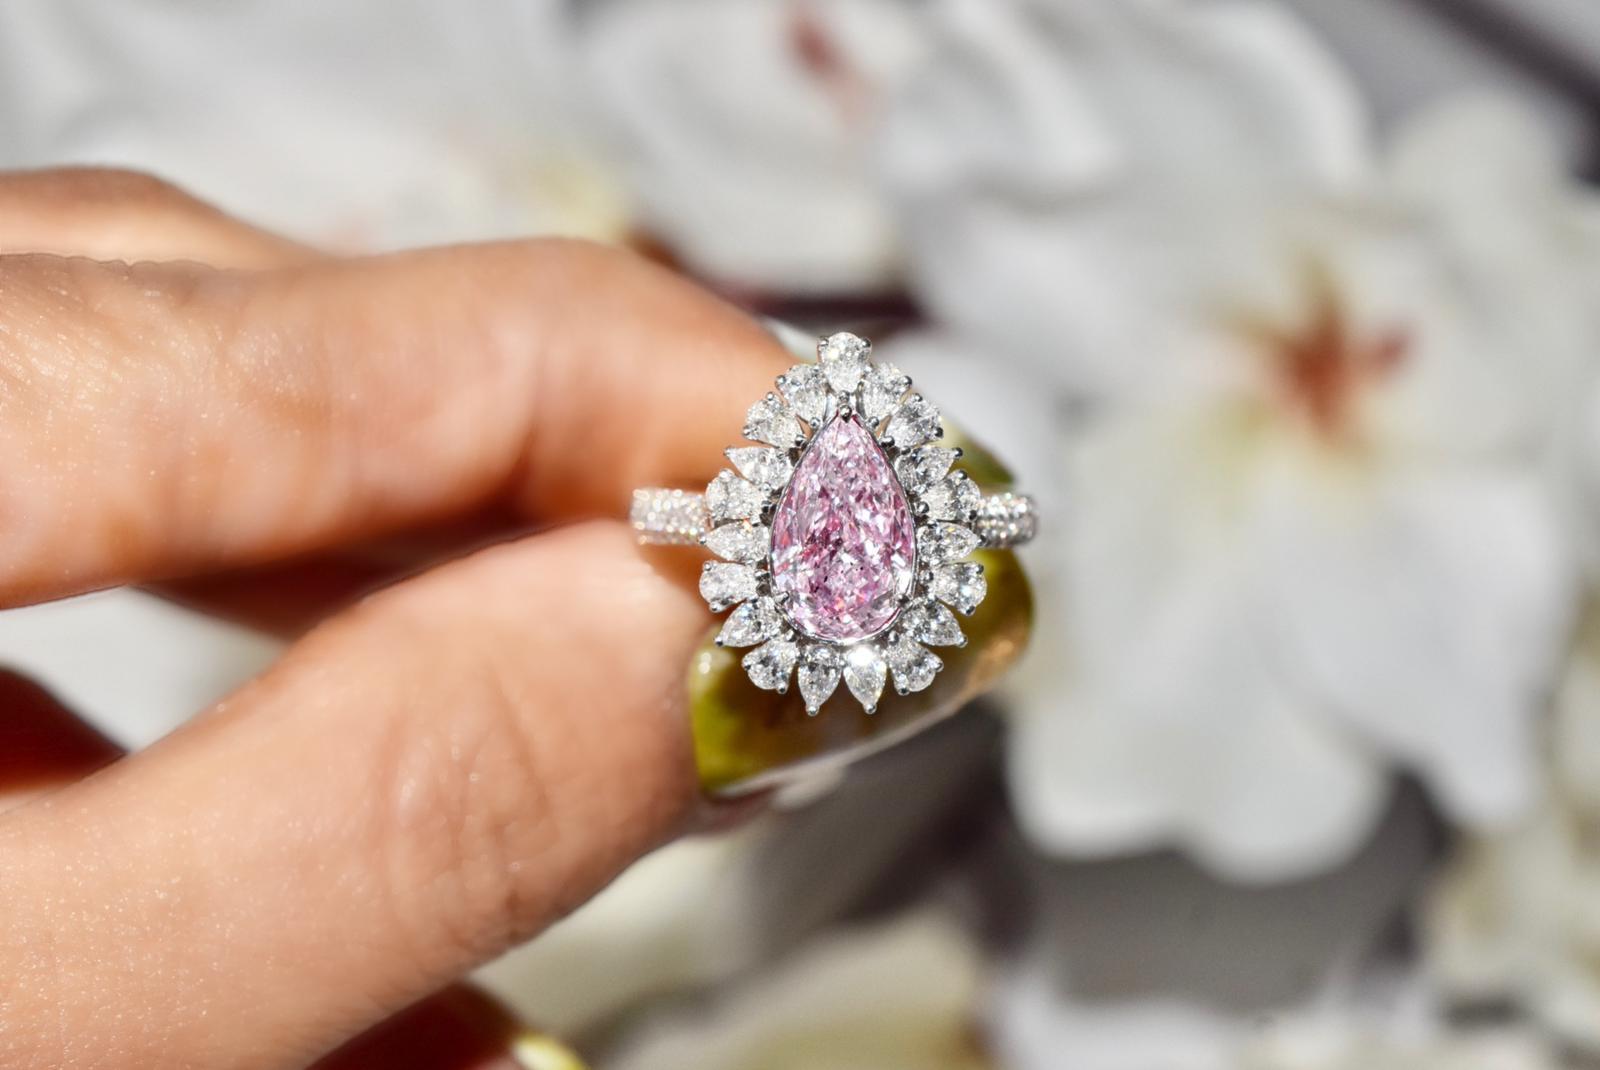 **100% NATURAL FANCY COLOUR DIAMOND JEWELLERIES**

✪ Jewelry Details ✪

♦ MAIN STONE DETAILS

➛ Stone Shape: Pear
➛ Stone Color: Light Pink
➛ Stone Weight: 1.50 carats
➛ Clarity: SI2
➛ GIA certified

♦ SIDE STONE DETAILS

➛ Side White diamonds - 58